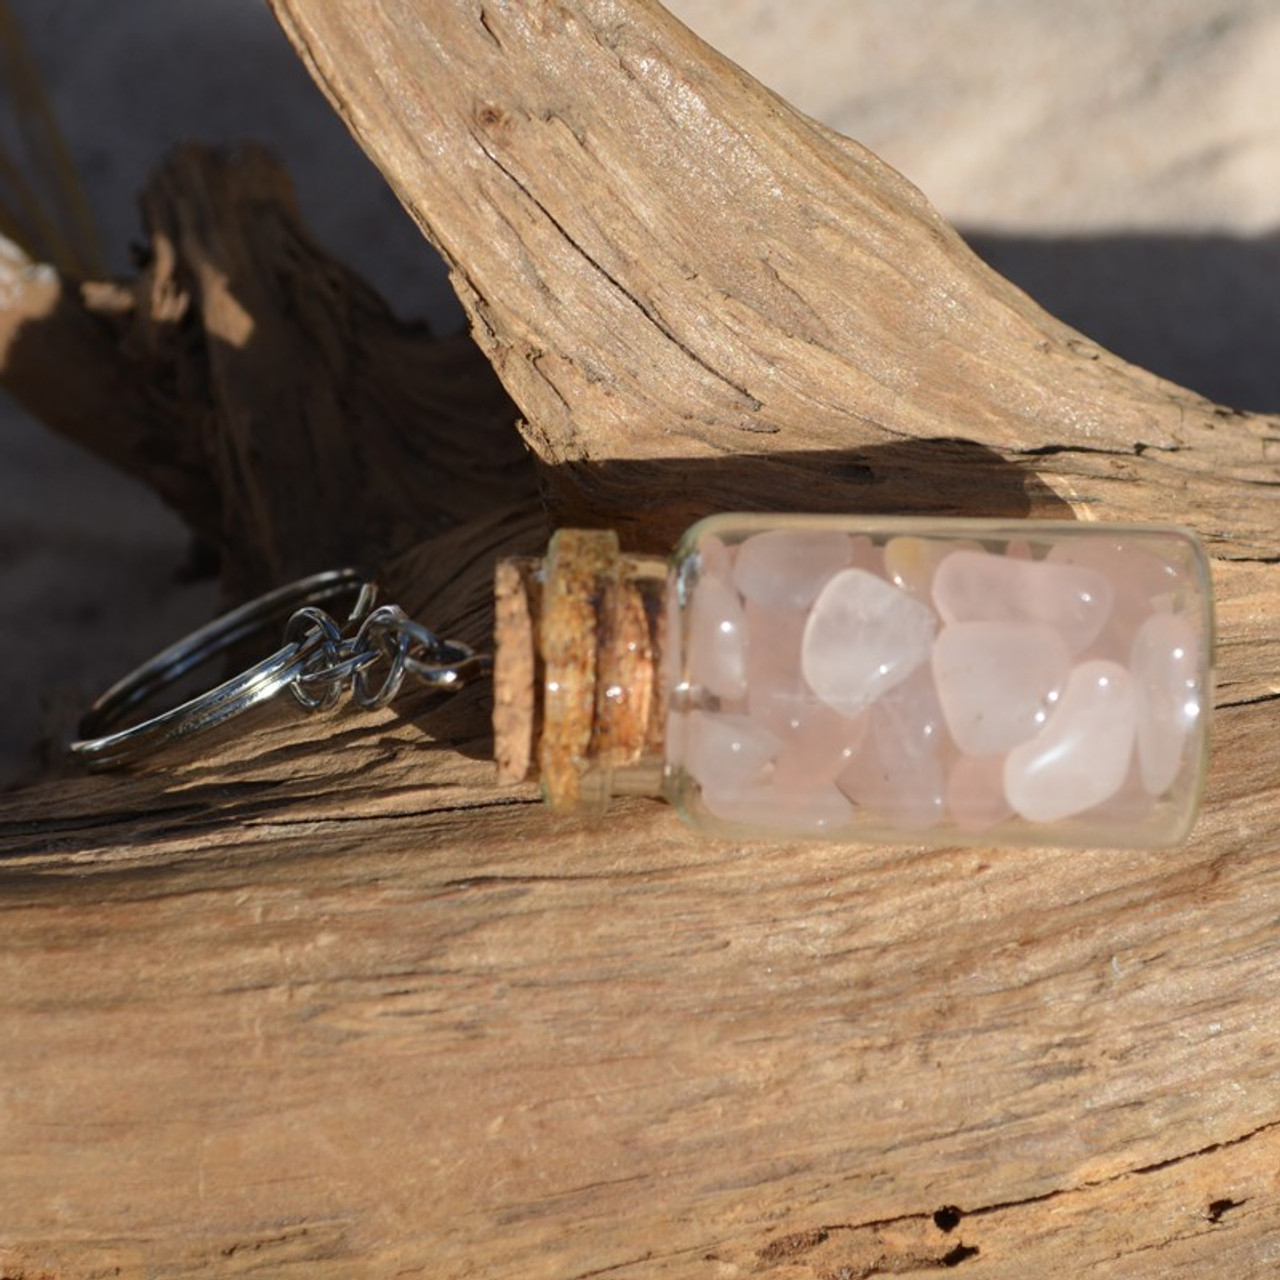 Rose Quartz Stones in a Glass Vial Keychain - Made to Order